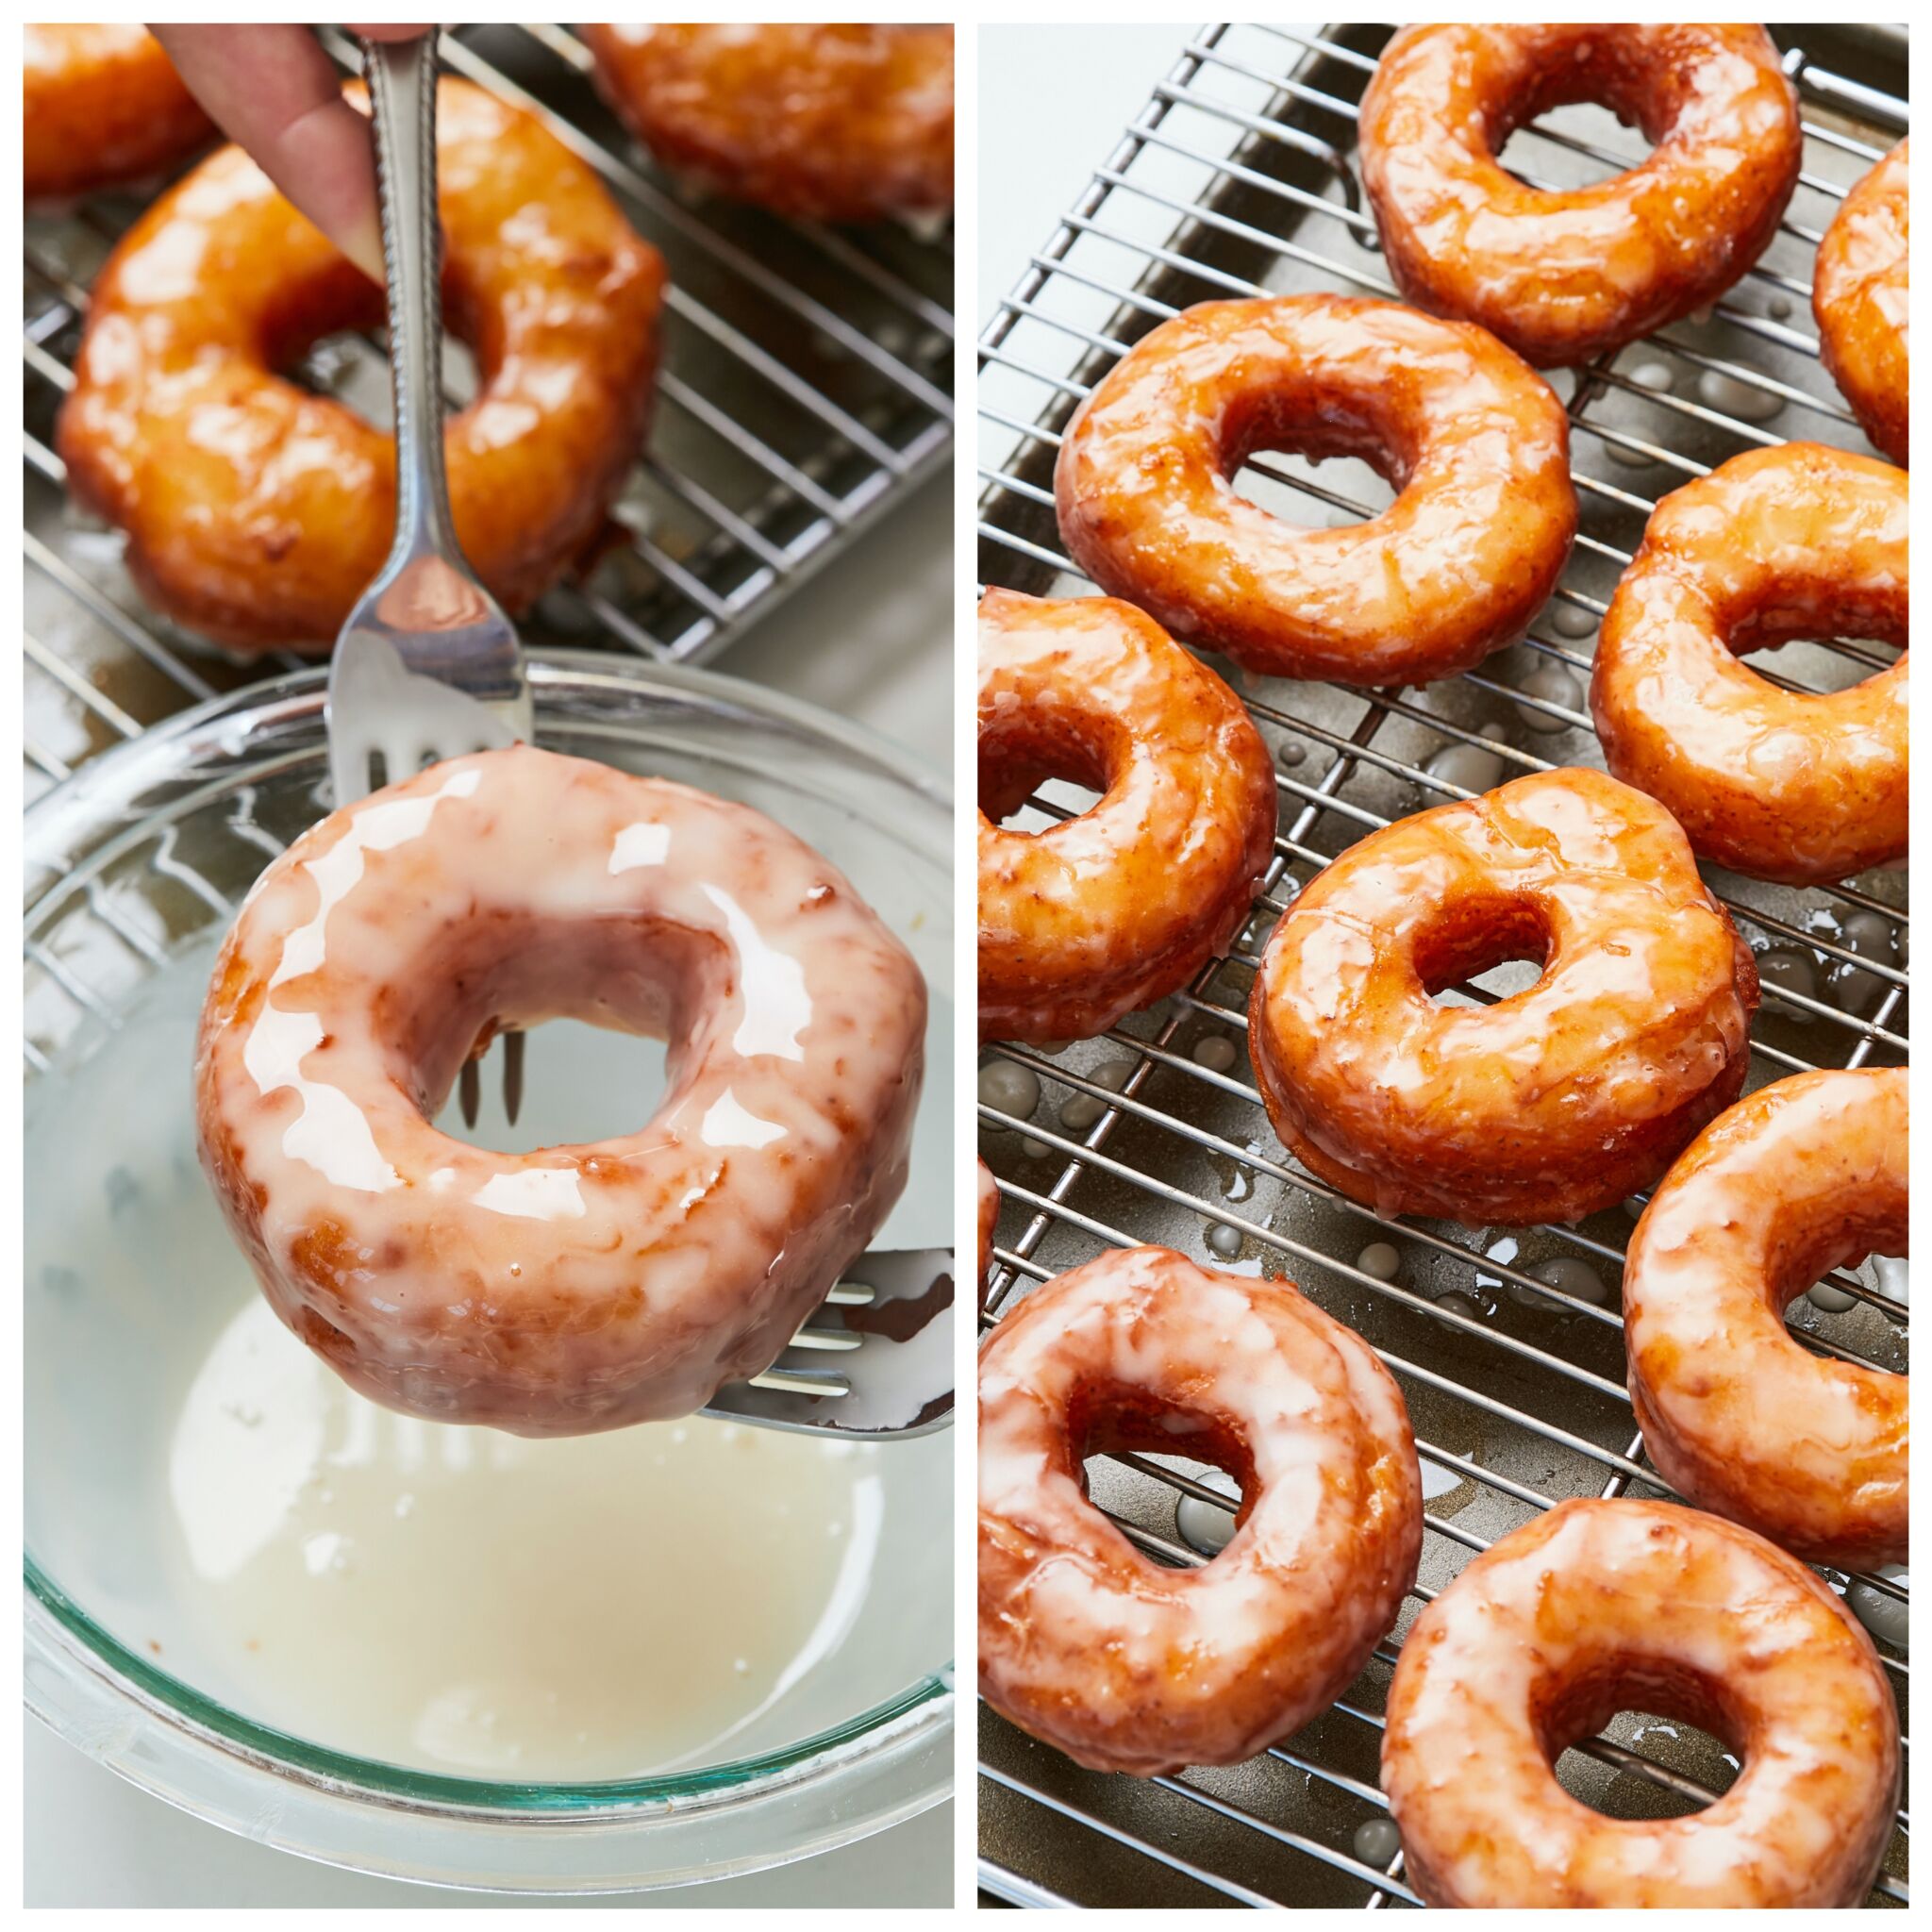 Use two forks to glaze the donuts with icing from a glass bowl, while they're hot. Then return them to the rack.